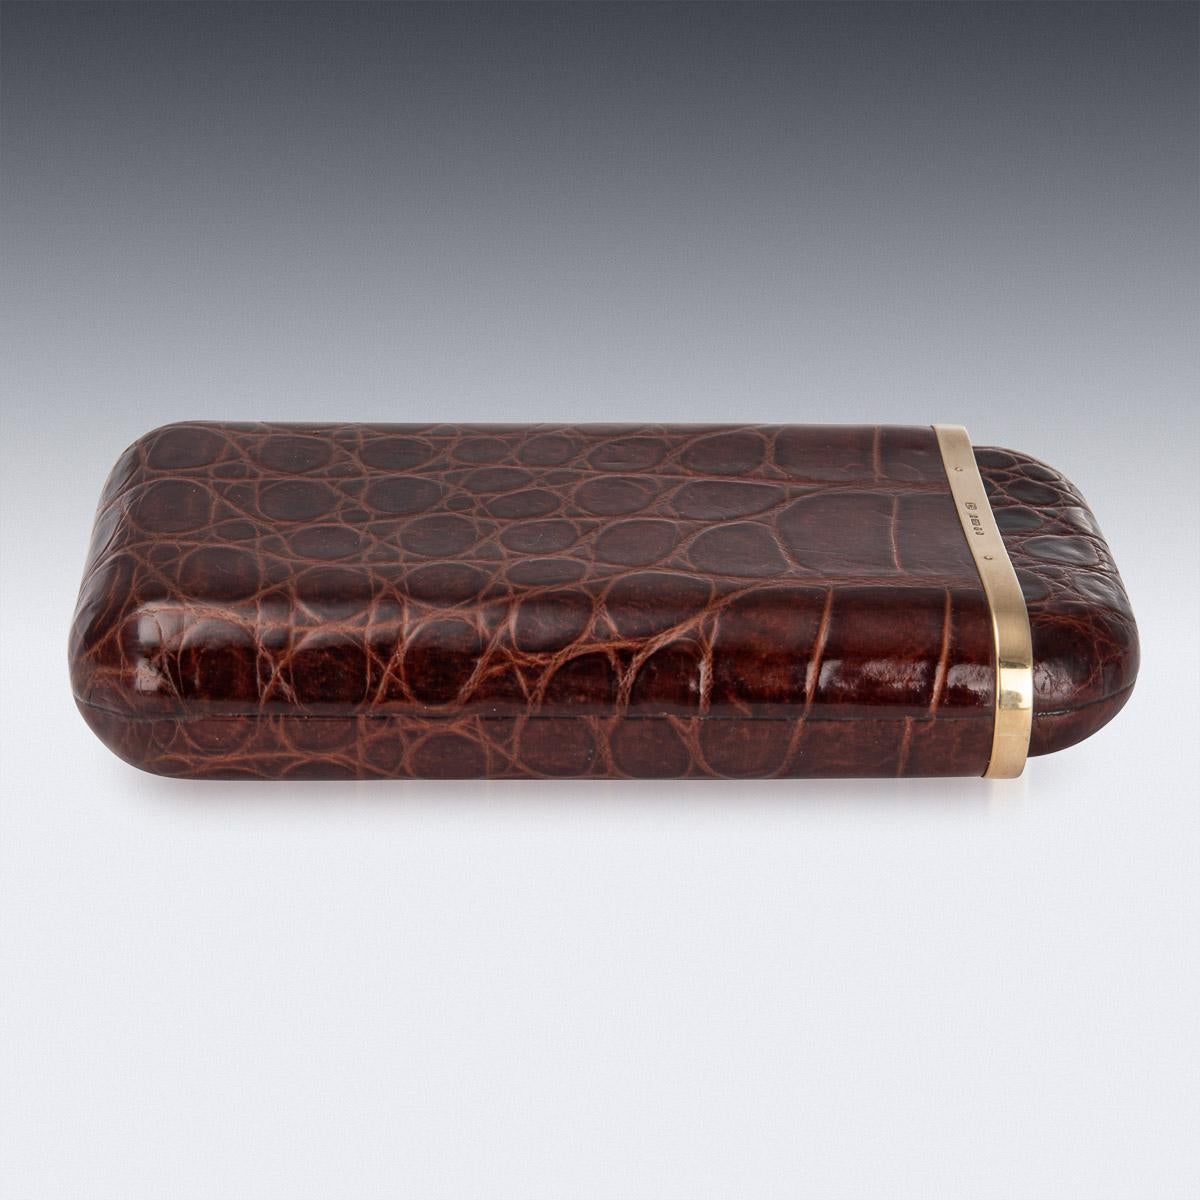 Stylish mid-20th century British made 9k gold mounted on sumptuous crocodile leather cigar case, of rounded rectangular form, with a pull off lid and interior that is sufficient for five mid-size cigars. Hallmarked with English gold marks 9 (375